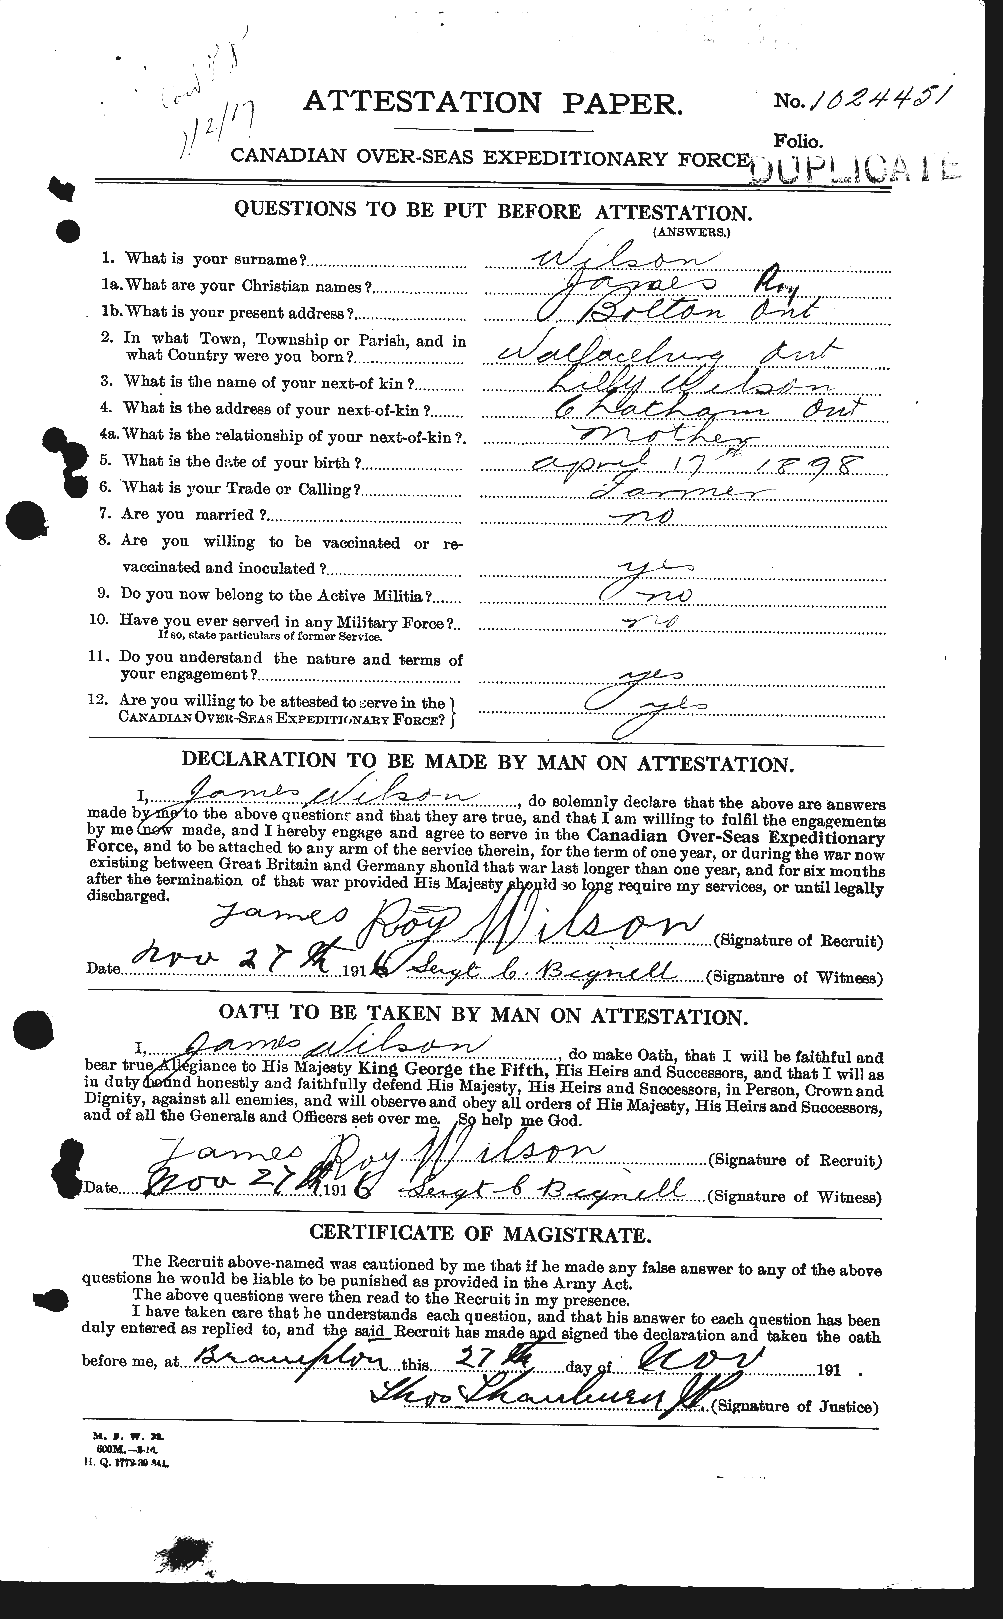 Personnel Records of the First World War - CEF 681493a